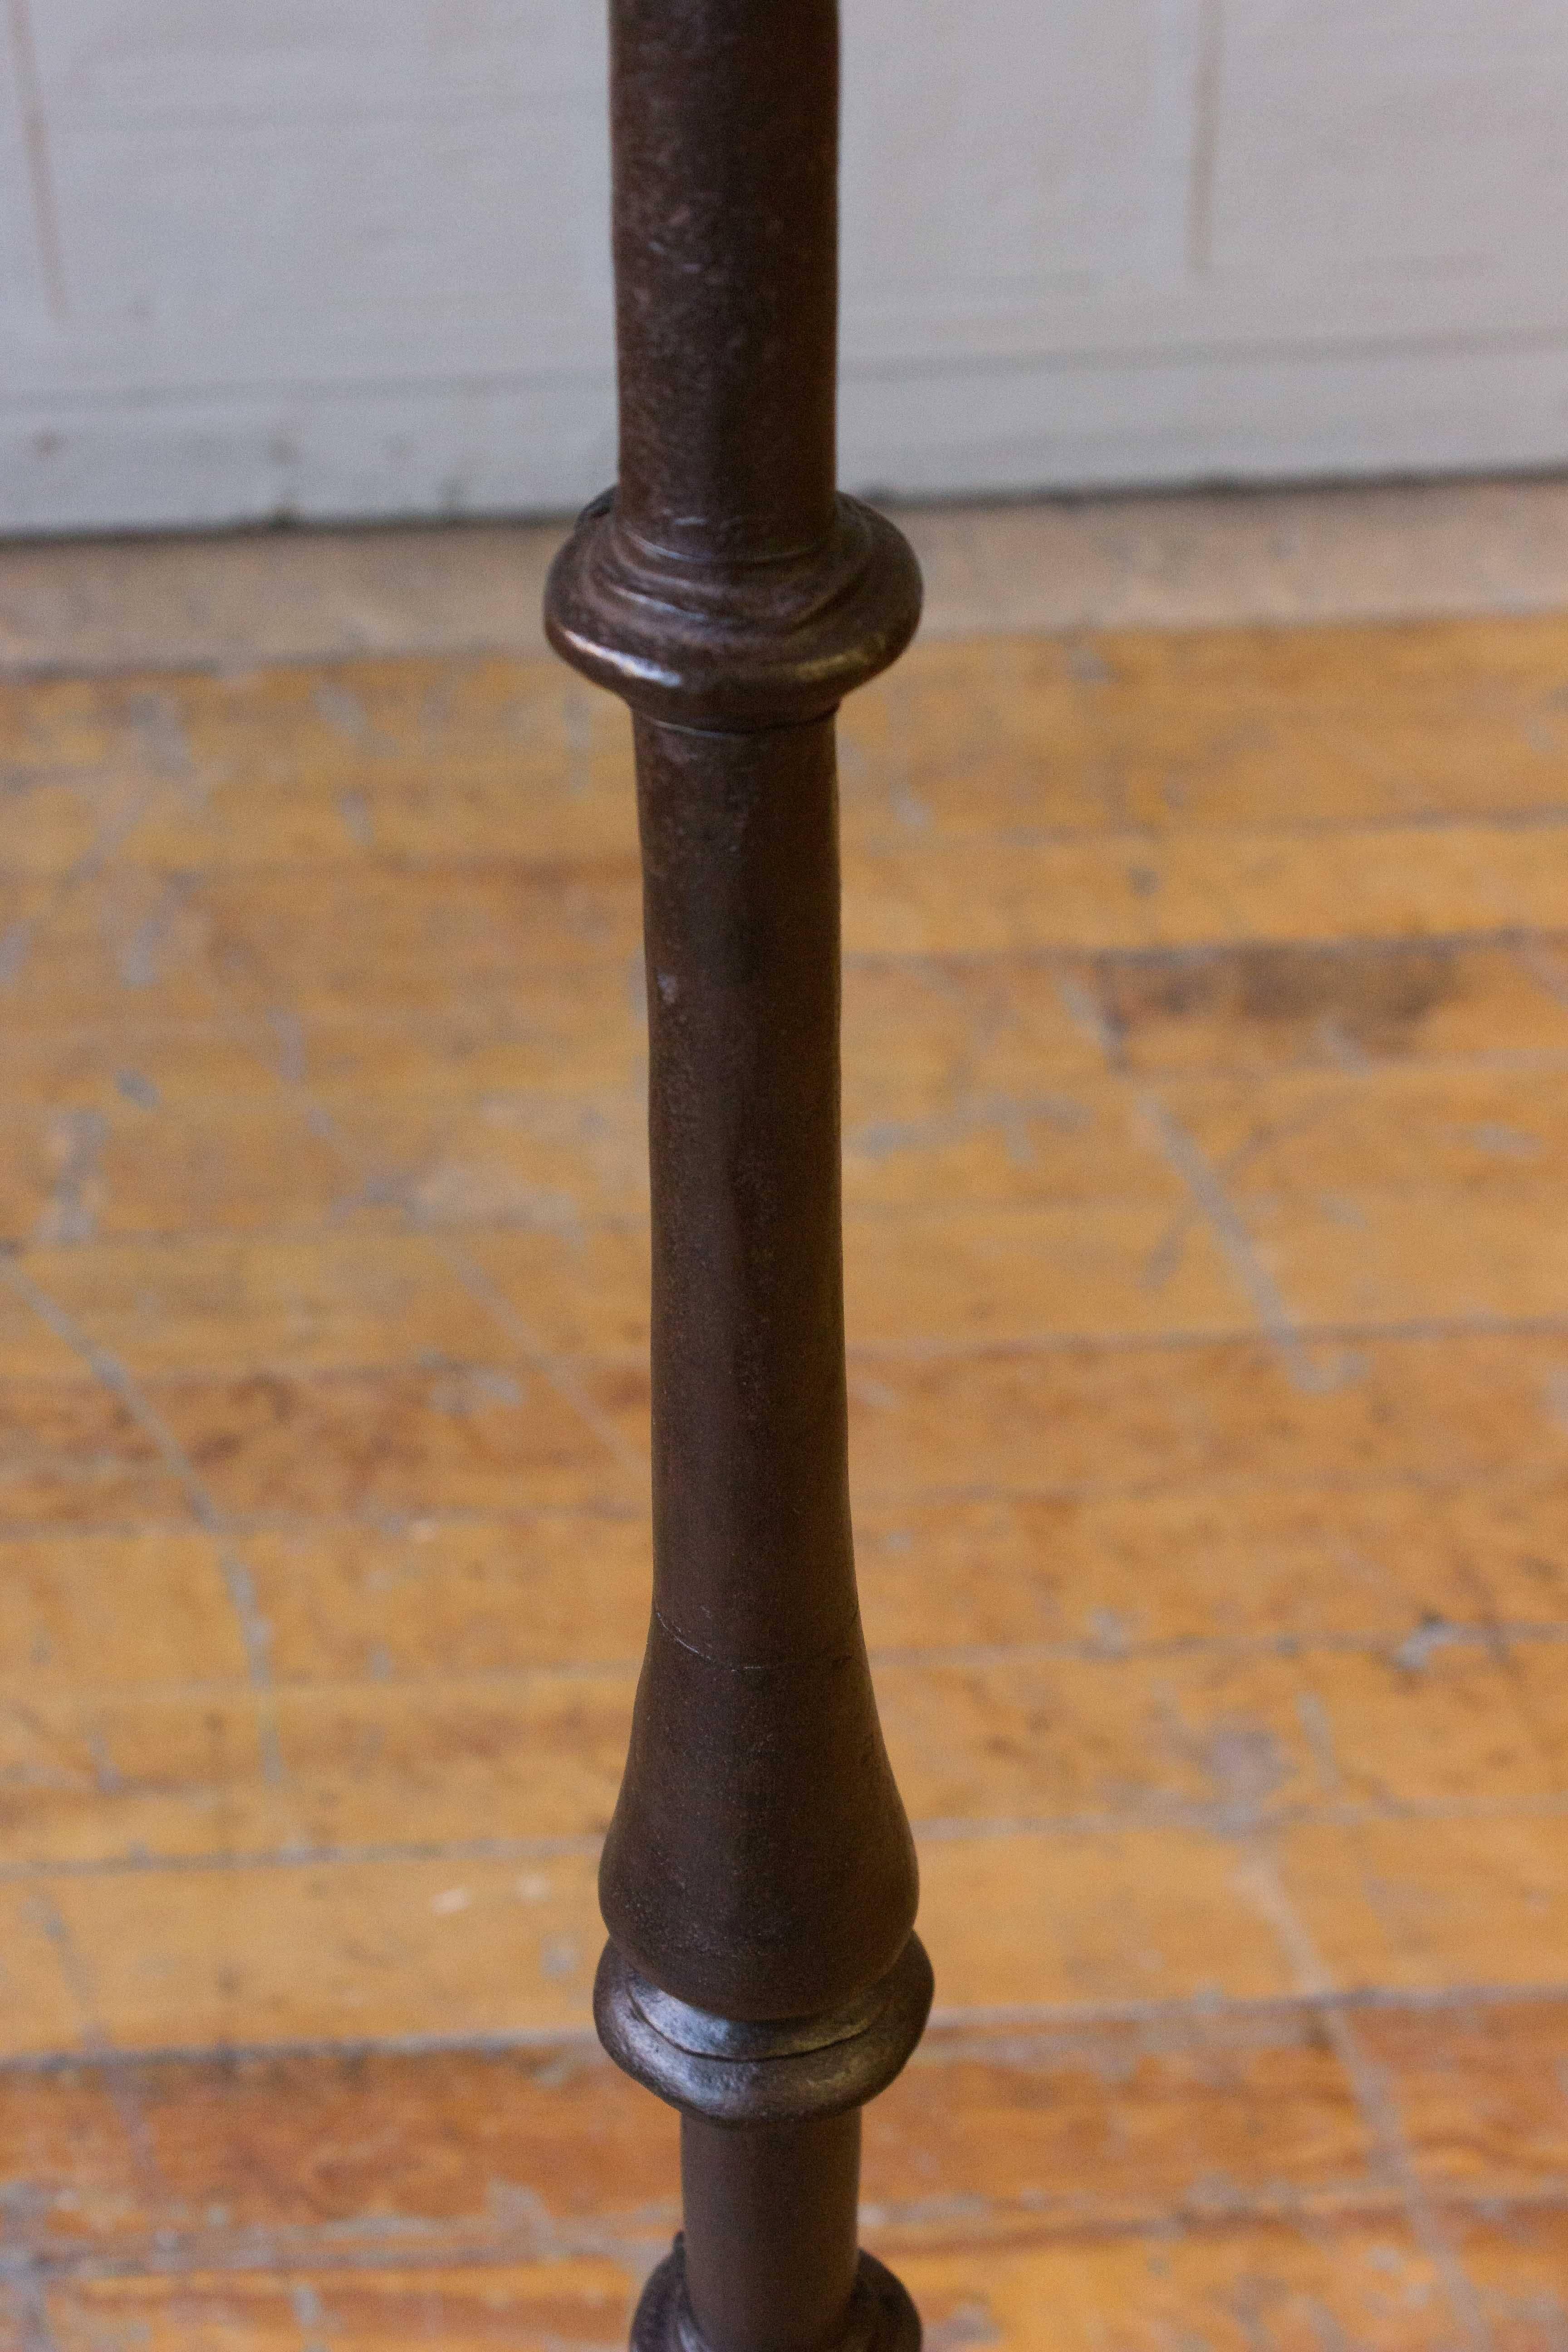 Mid-20th Century Spanish Wrought Iron Floor Lamp with a Tripod Base